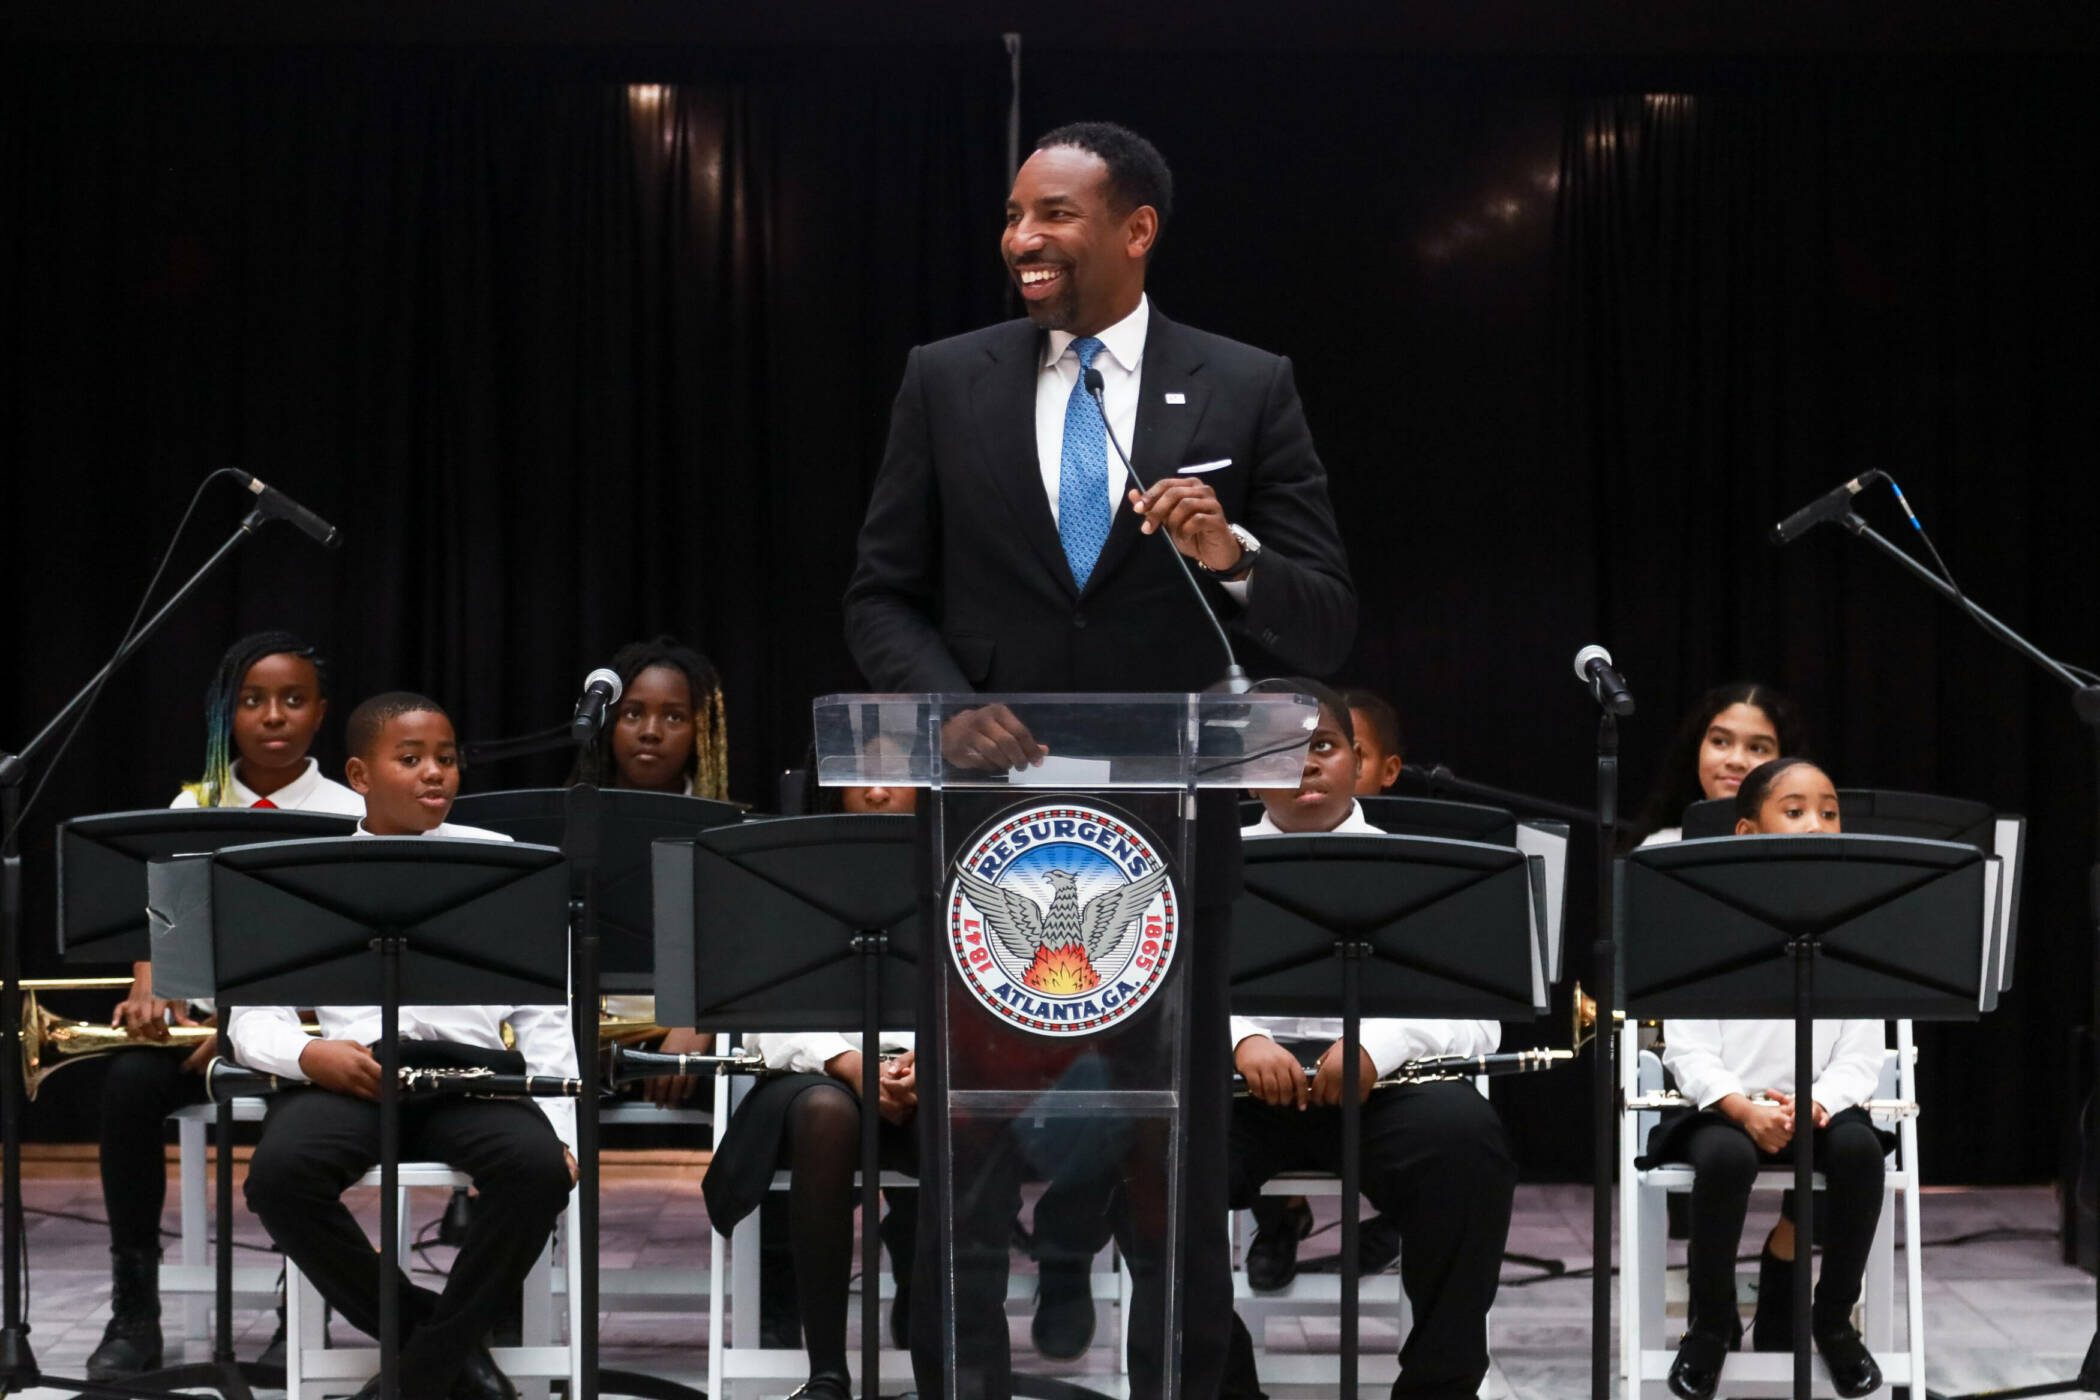 Mayor of Atlanta Andre Dickens addresses attendees at Atlanta's City Hall while at a podium in front of AMP Afterschool Musicians 